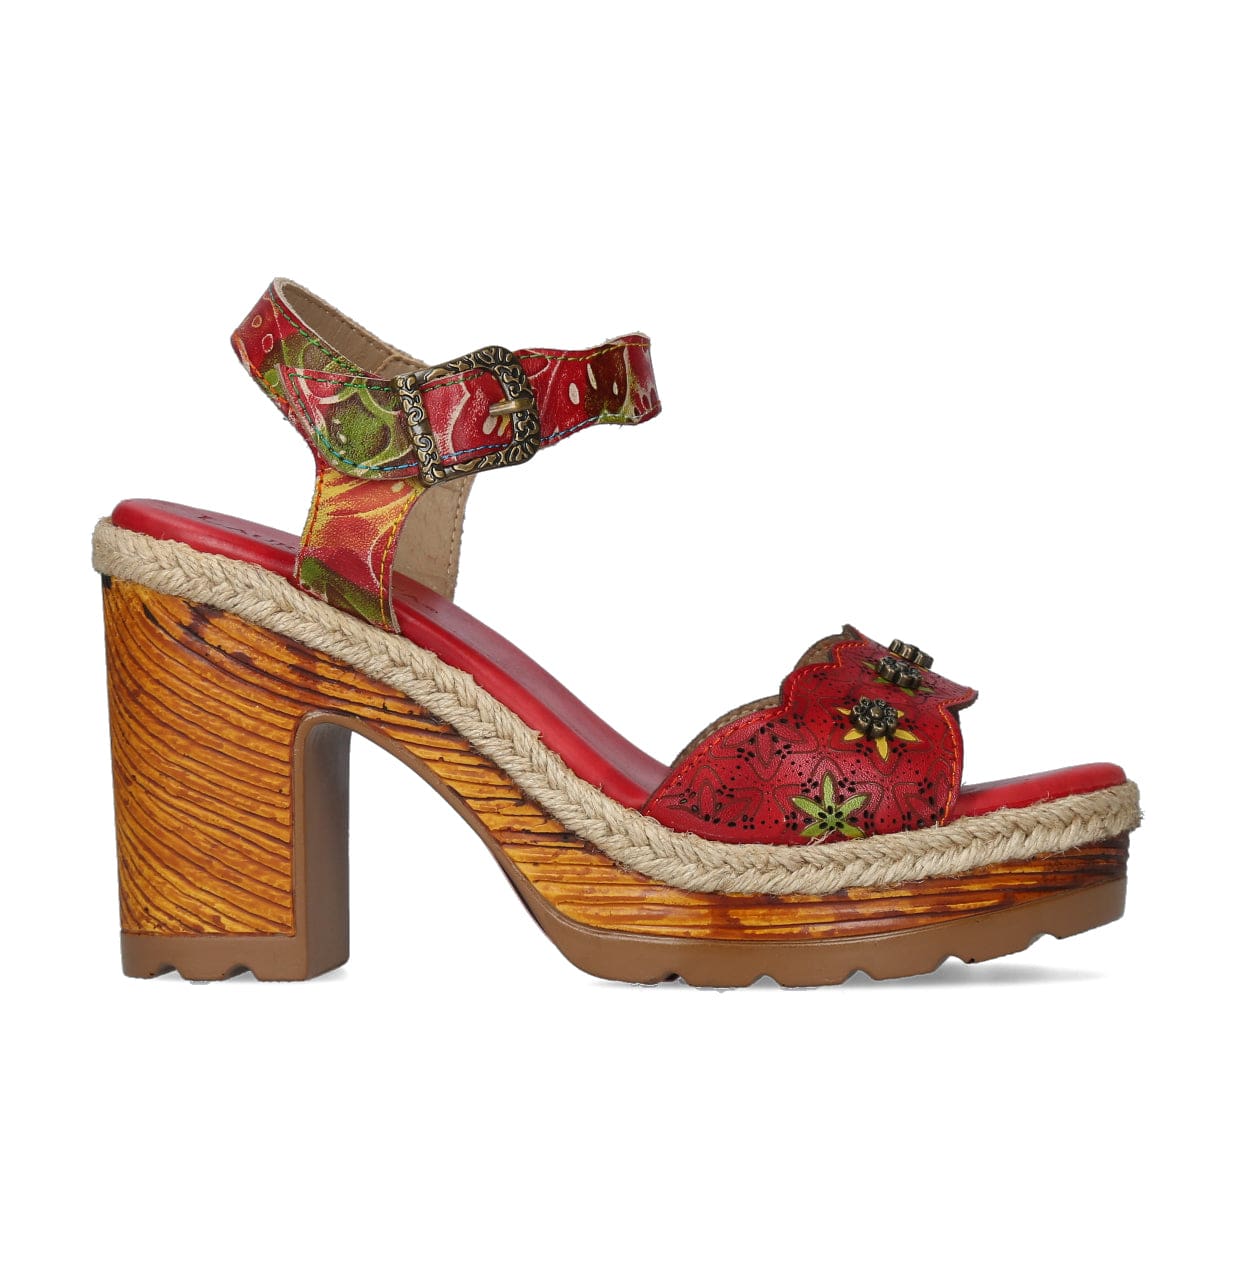 JACAO 10 - 35 / Red - Sandal